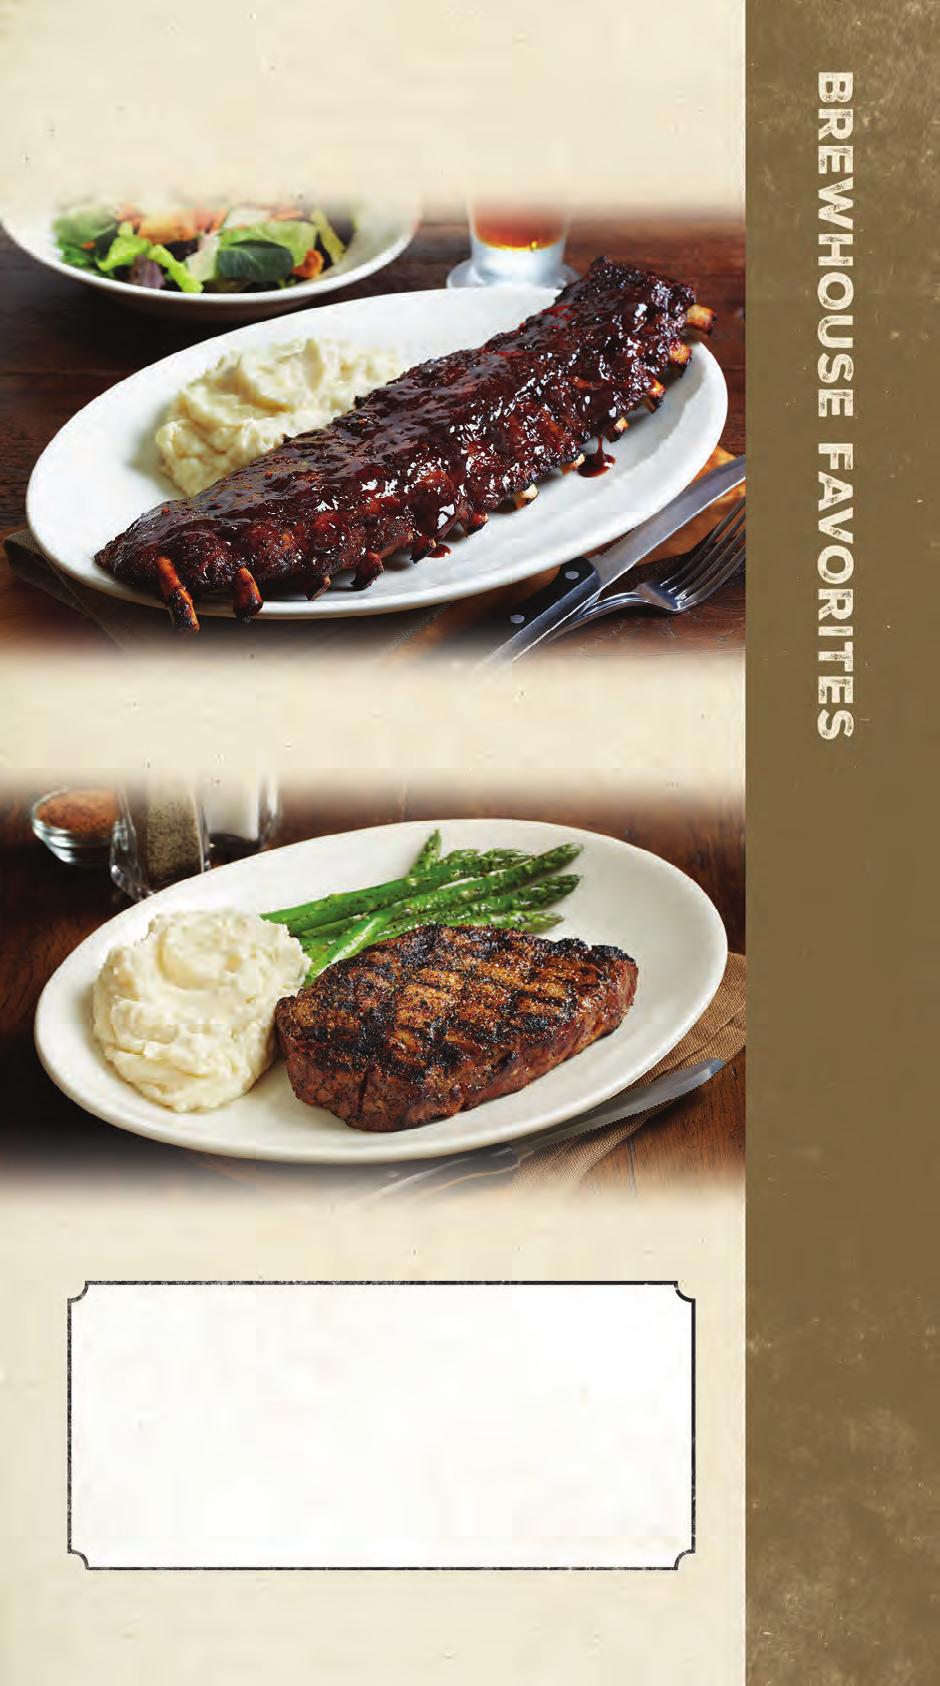 RIBS AND STEAKS Our flame-grilled steaks are hand-cut, aged for at least 28 days and seasoned with Big Poppa Smokers Double Secret Steak rub. Served with any two signature sides.